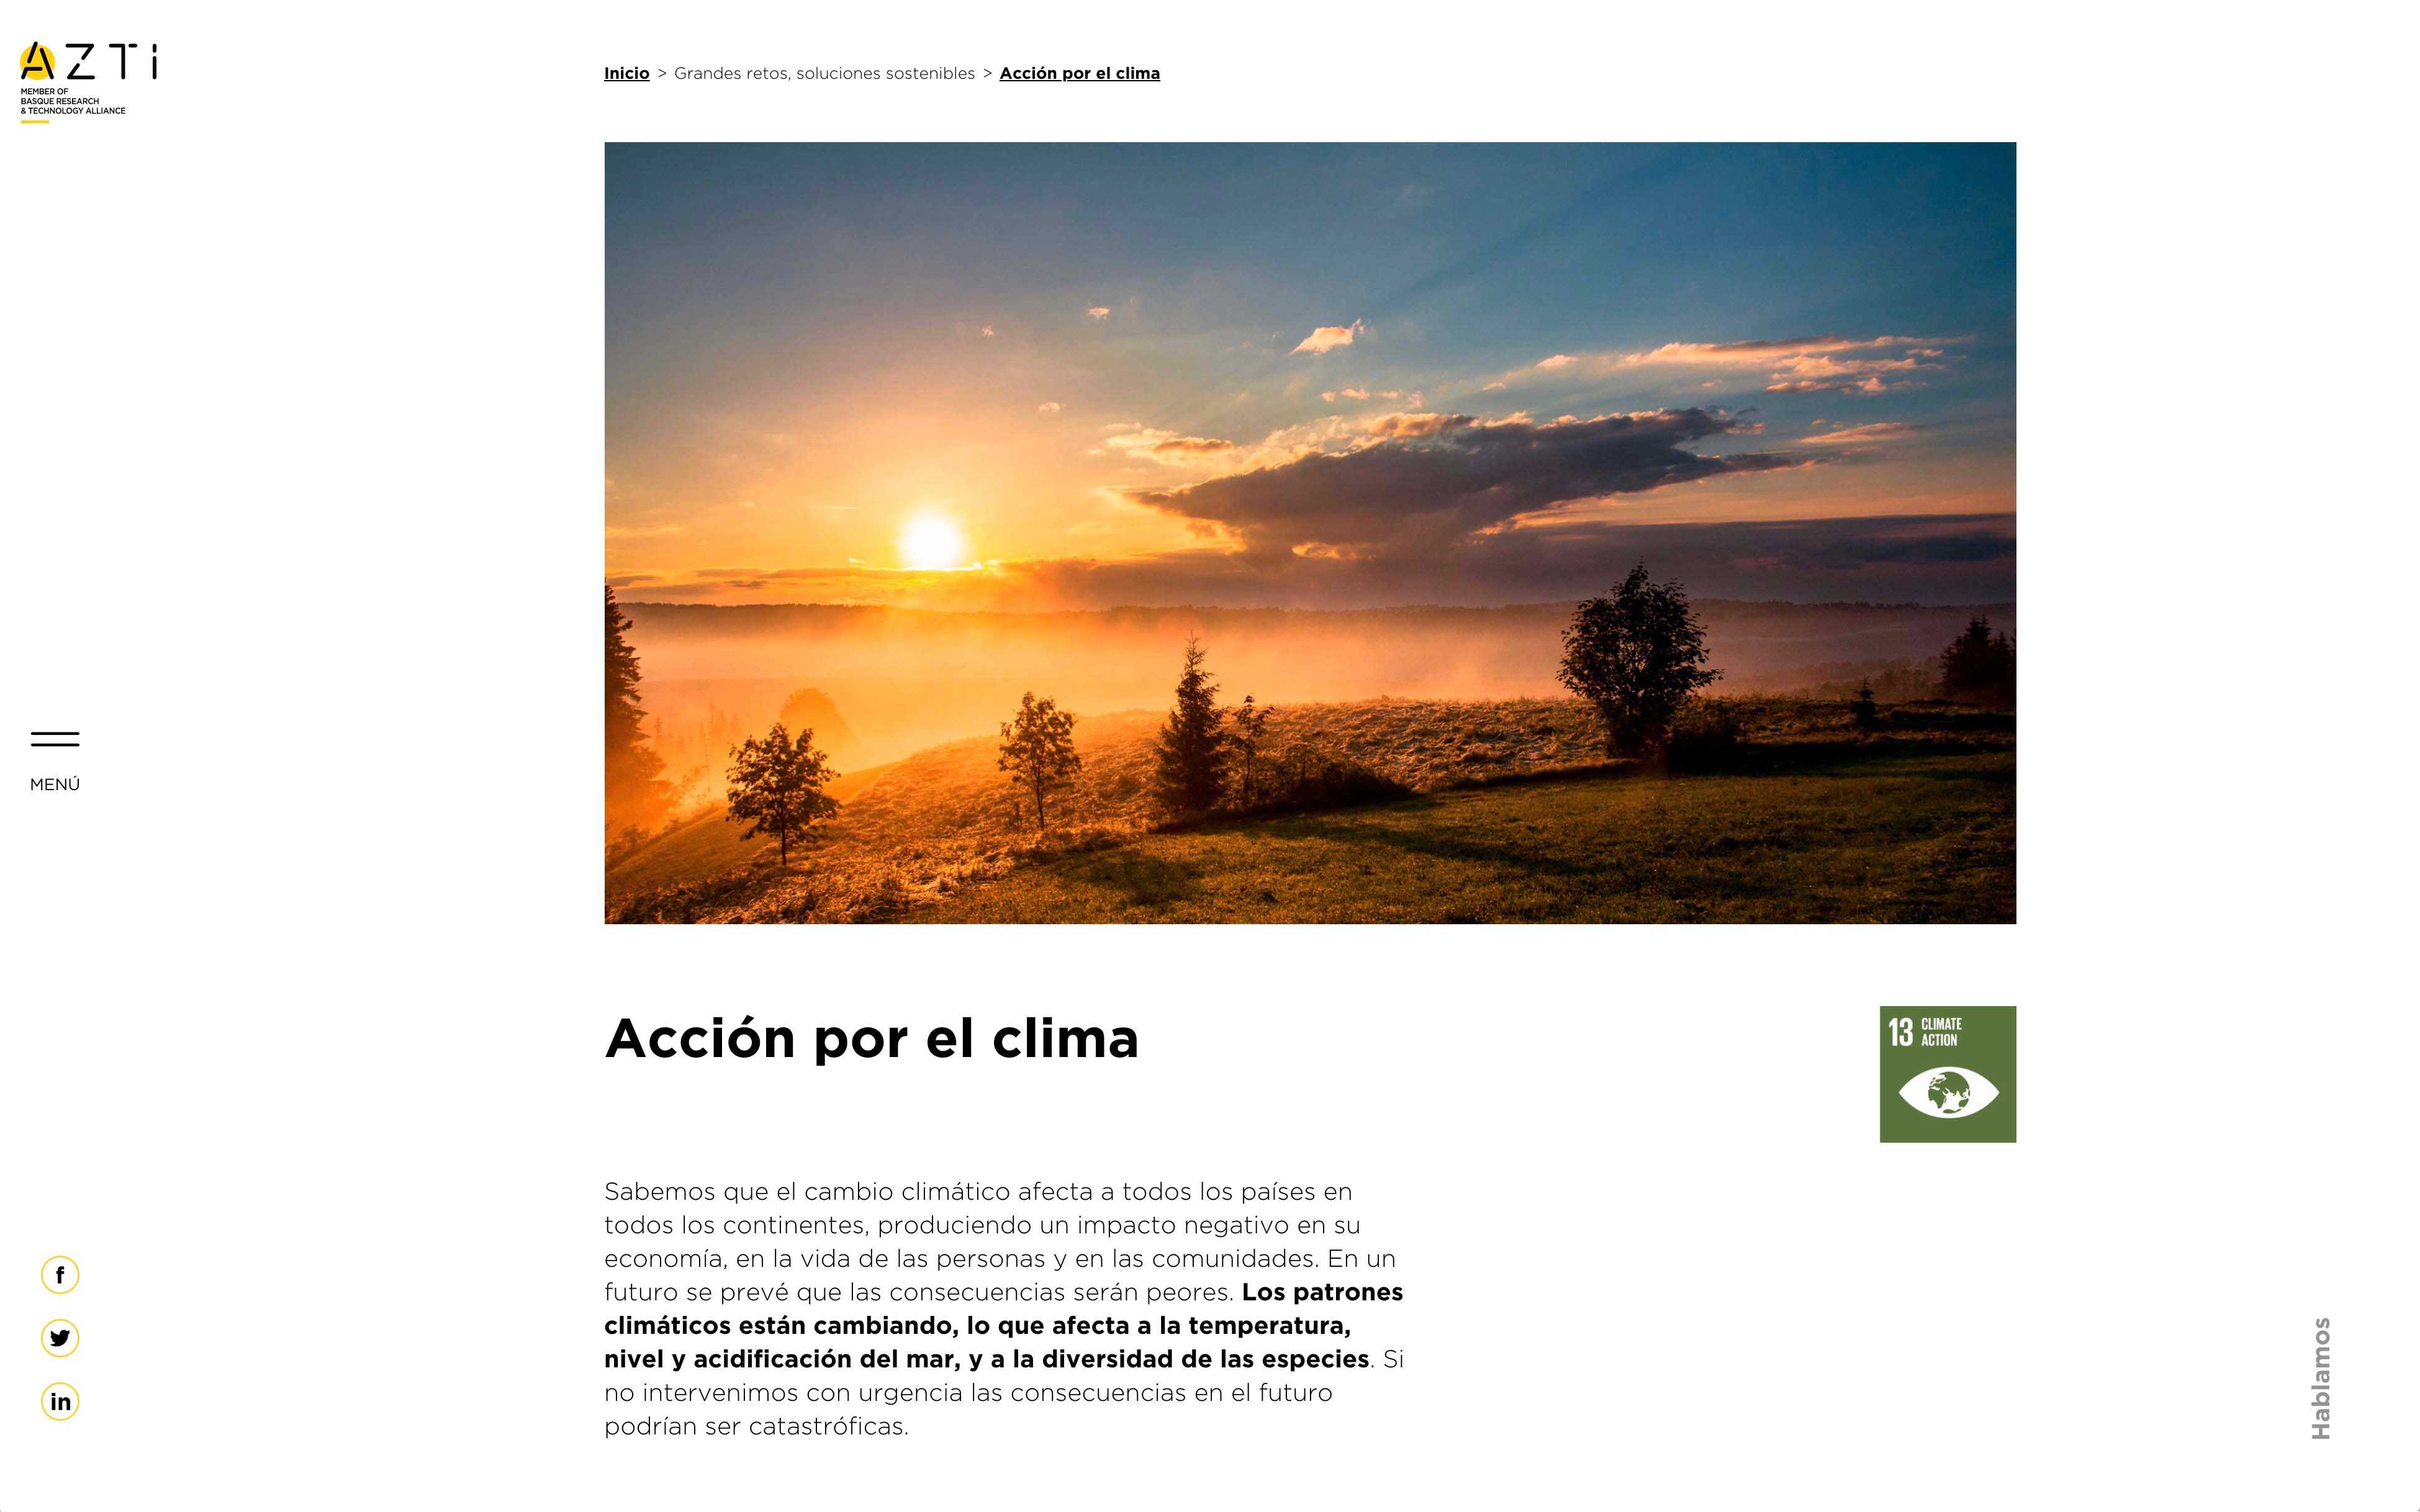 Azti web action for the climate